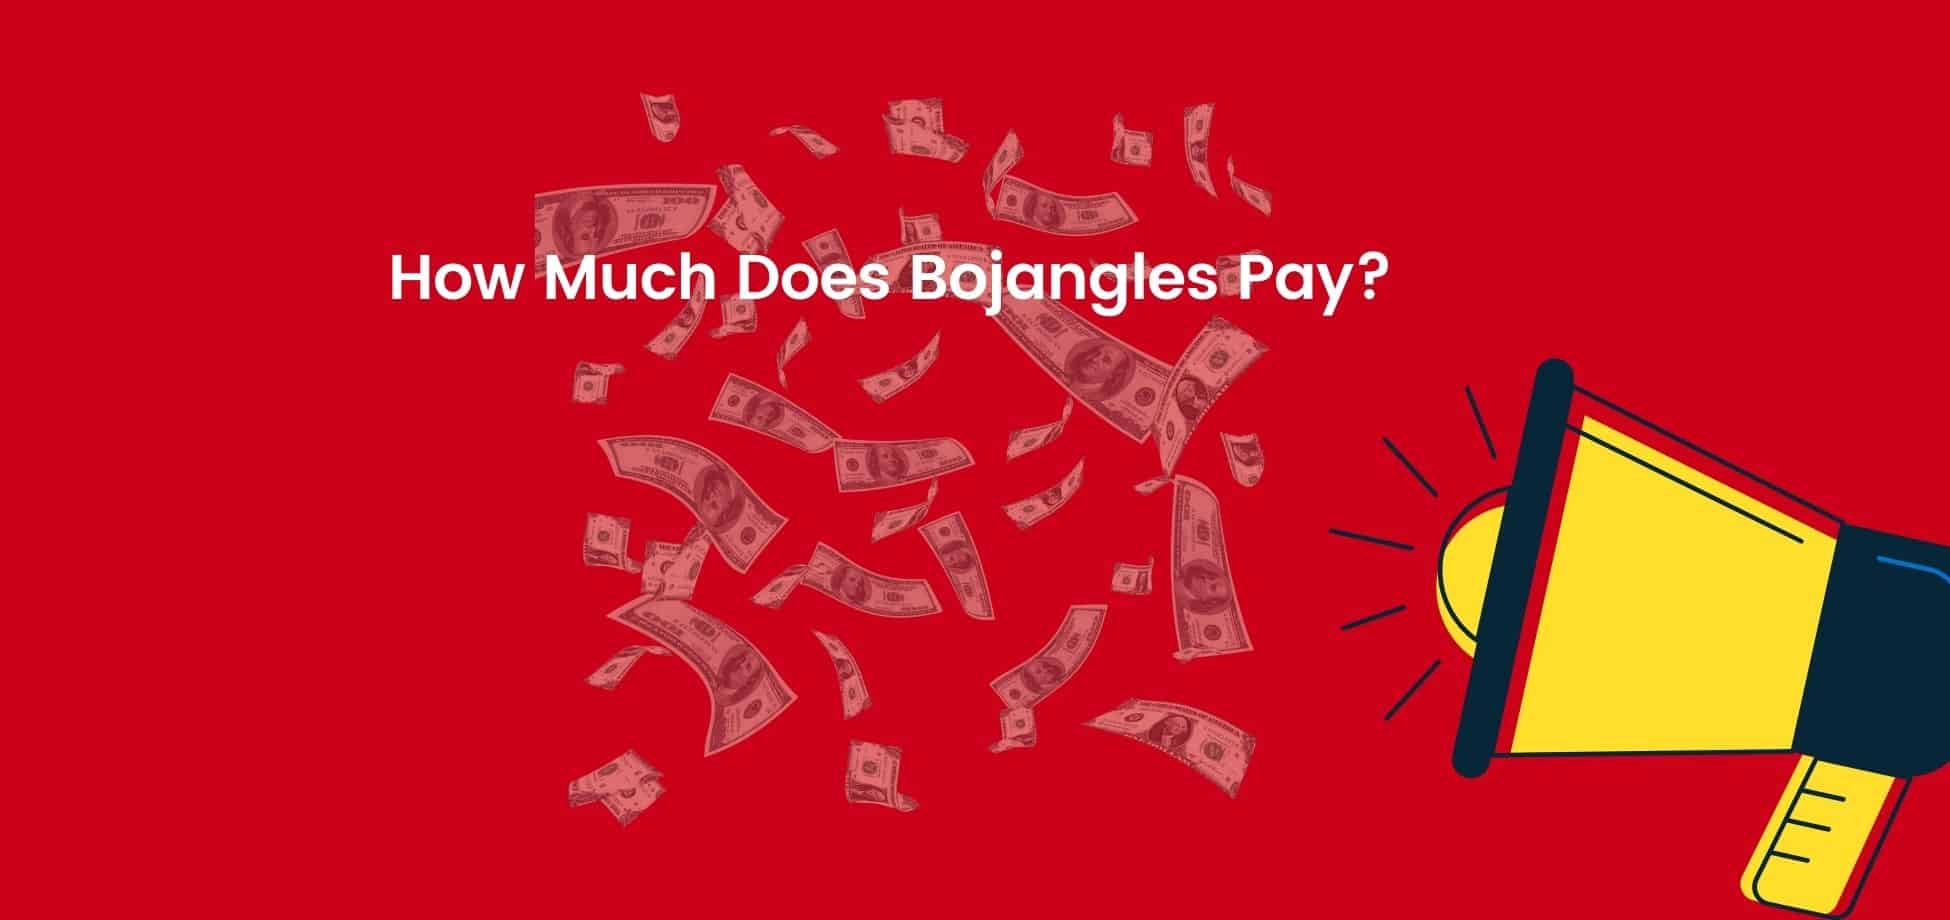 See the Bojangles starting hourly pay for entry-level workers as well as average pay and salaries.